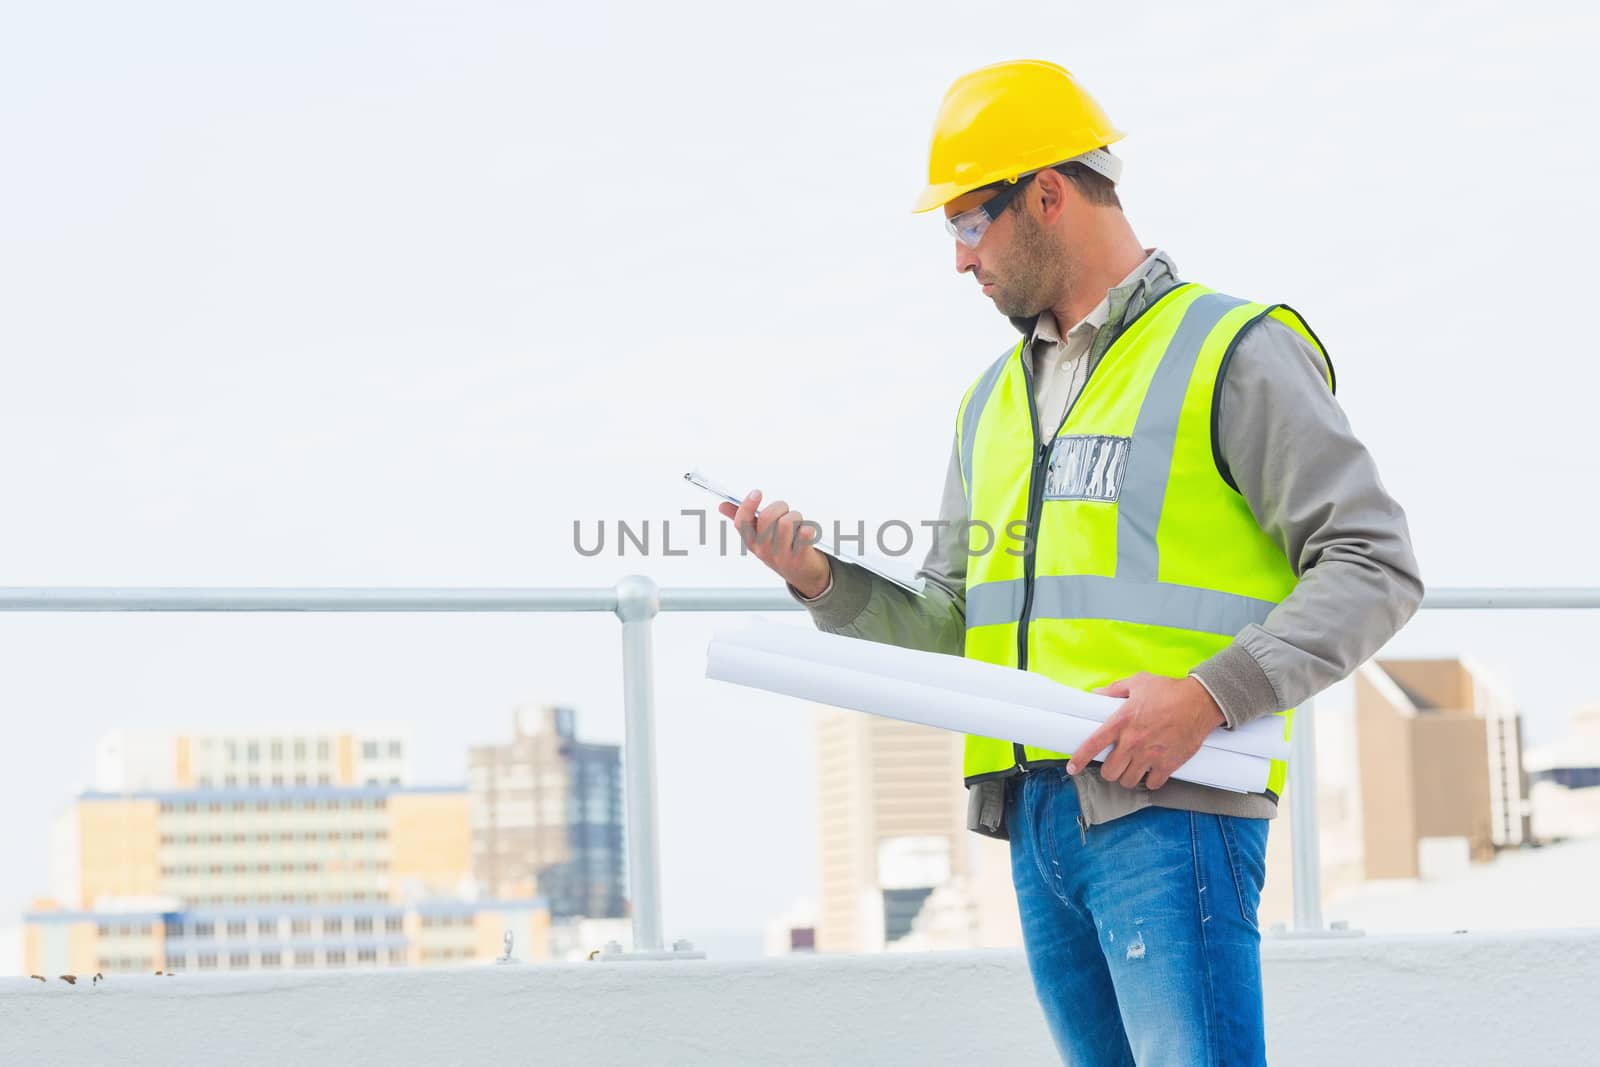 Male architect with blueprints reading clipboard outdoors